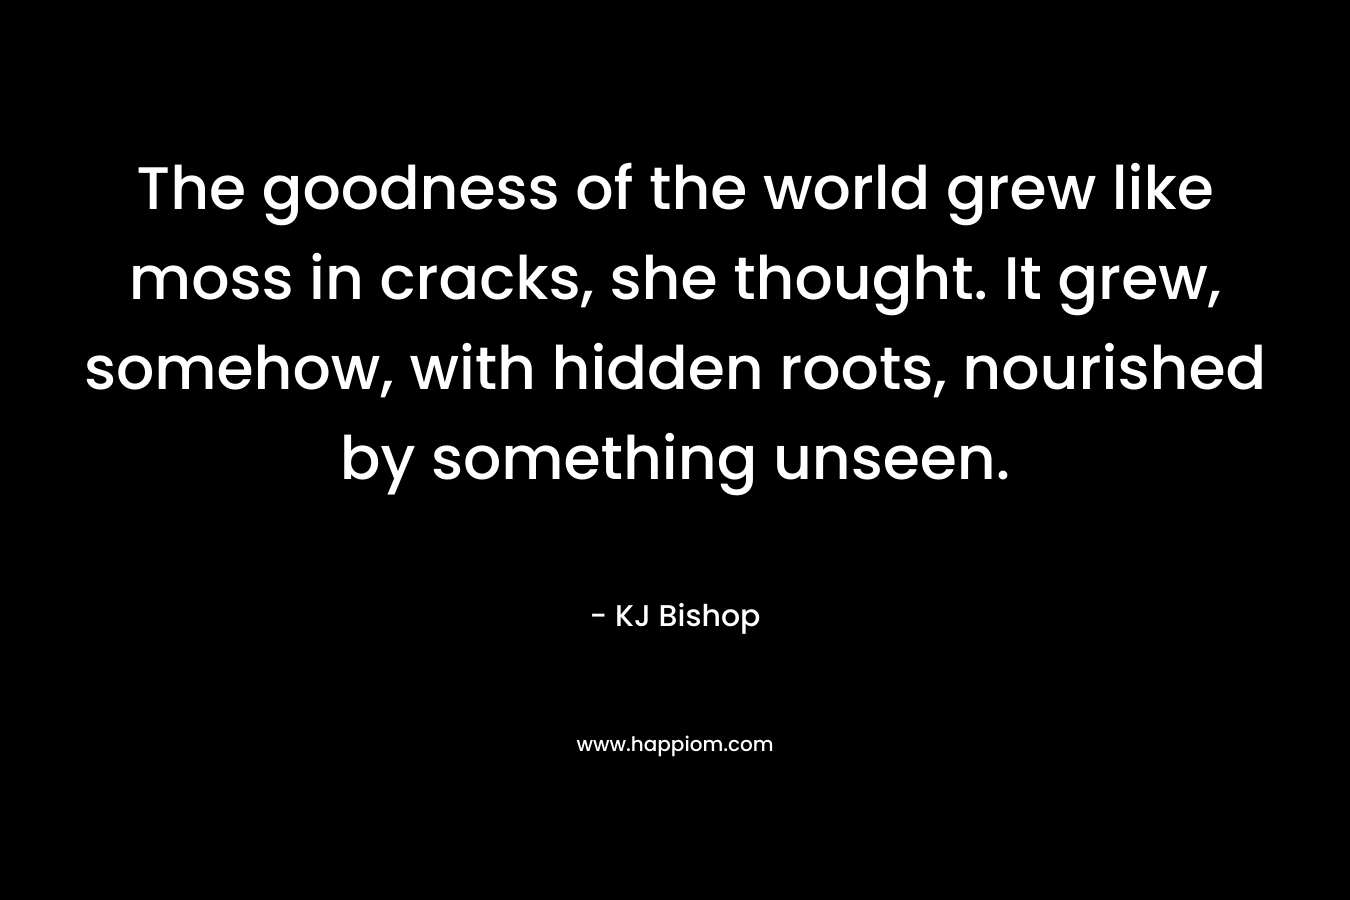 The goodness of the world grew like moss in cracks, she thought. It grew, somehow, with hidden roots, nourished by something unseen. – KJ Bishop